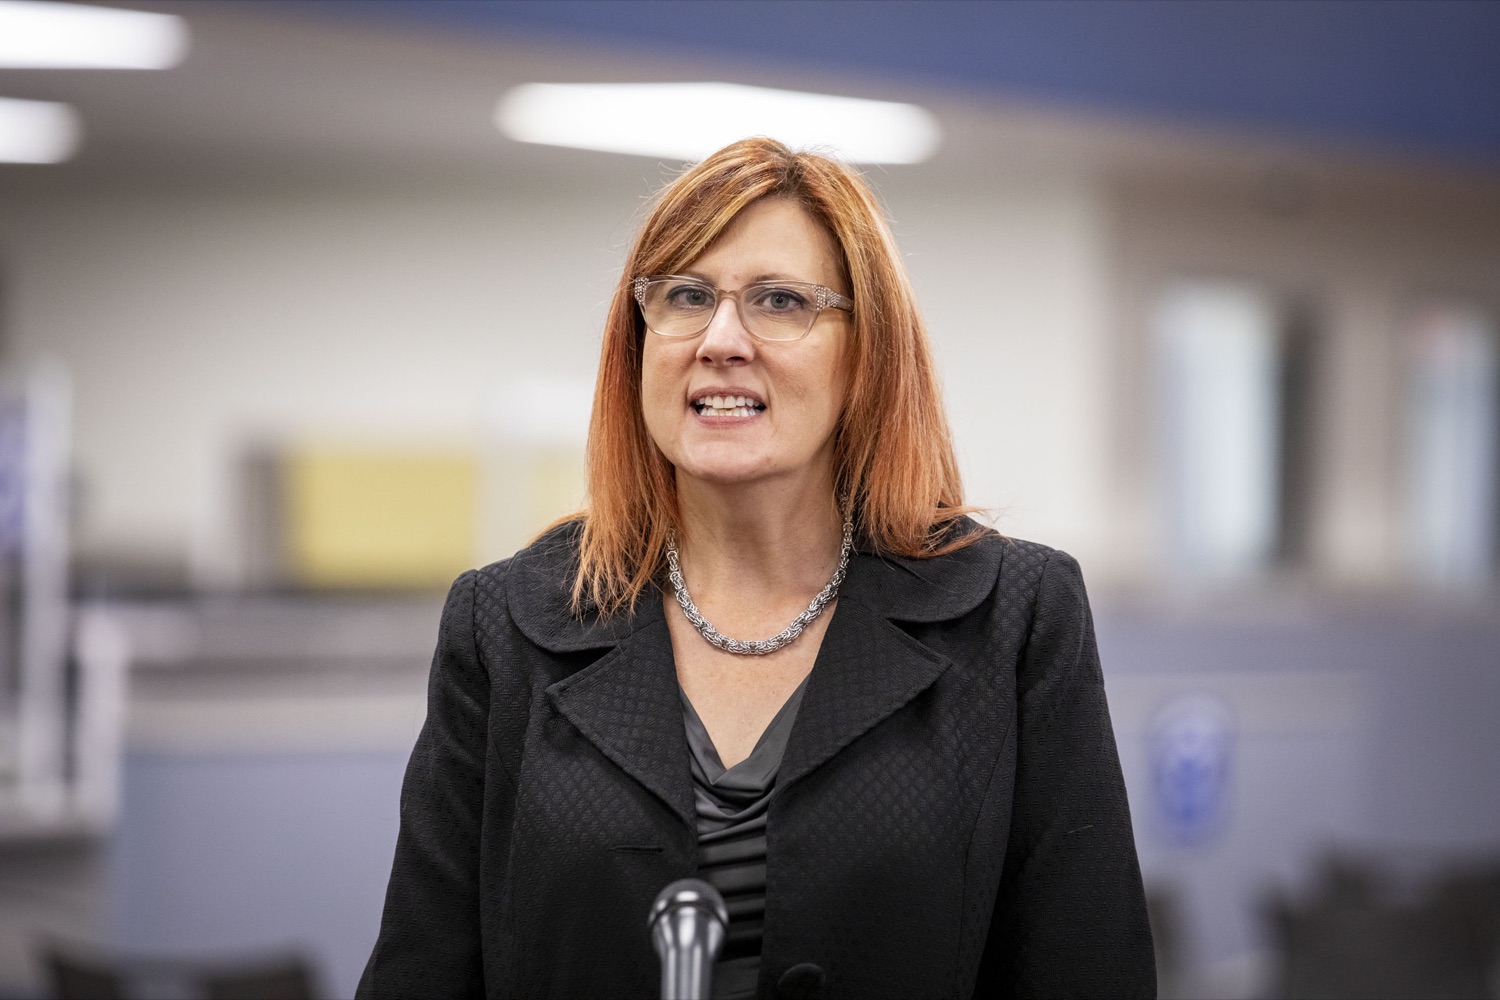 Kara Templeton, Director of the Bureau of Driver Licensing, reminds customers of updates to identification products as part of ongoing security enhancements, in Enola, PA on September 22, 2022.<br><a href="https://filesource.amperwave.net/commonwealthofpa/photo/22223_dot_security_cz_22.jpg" target="_blank">⇣ Download Photo</a>